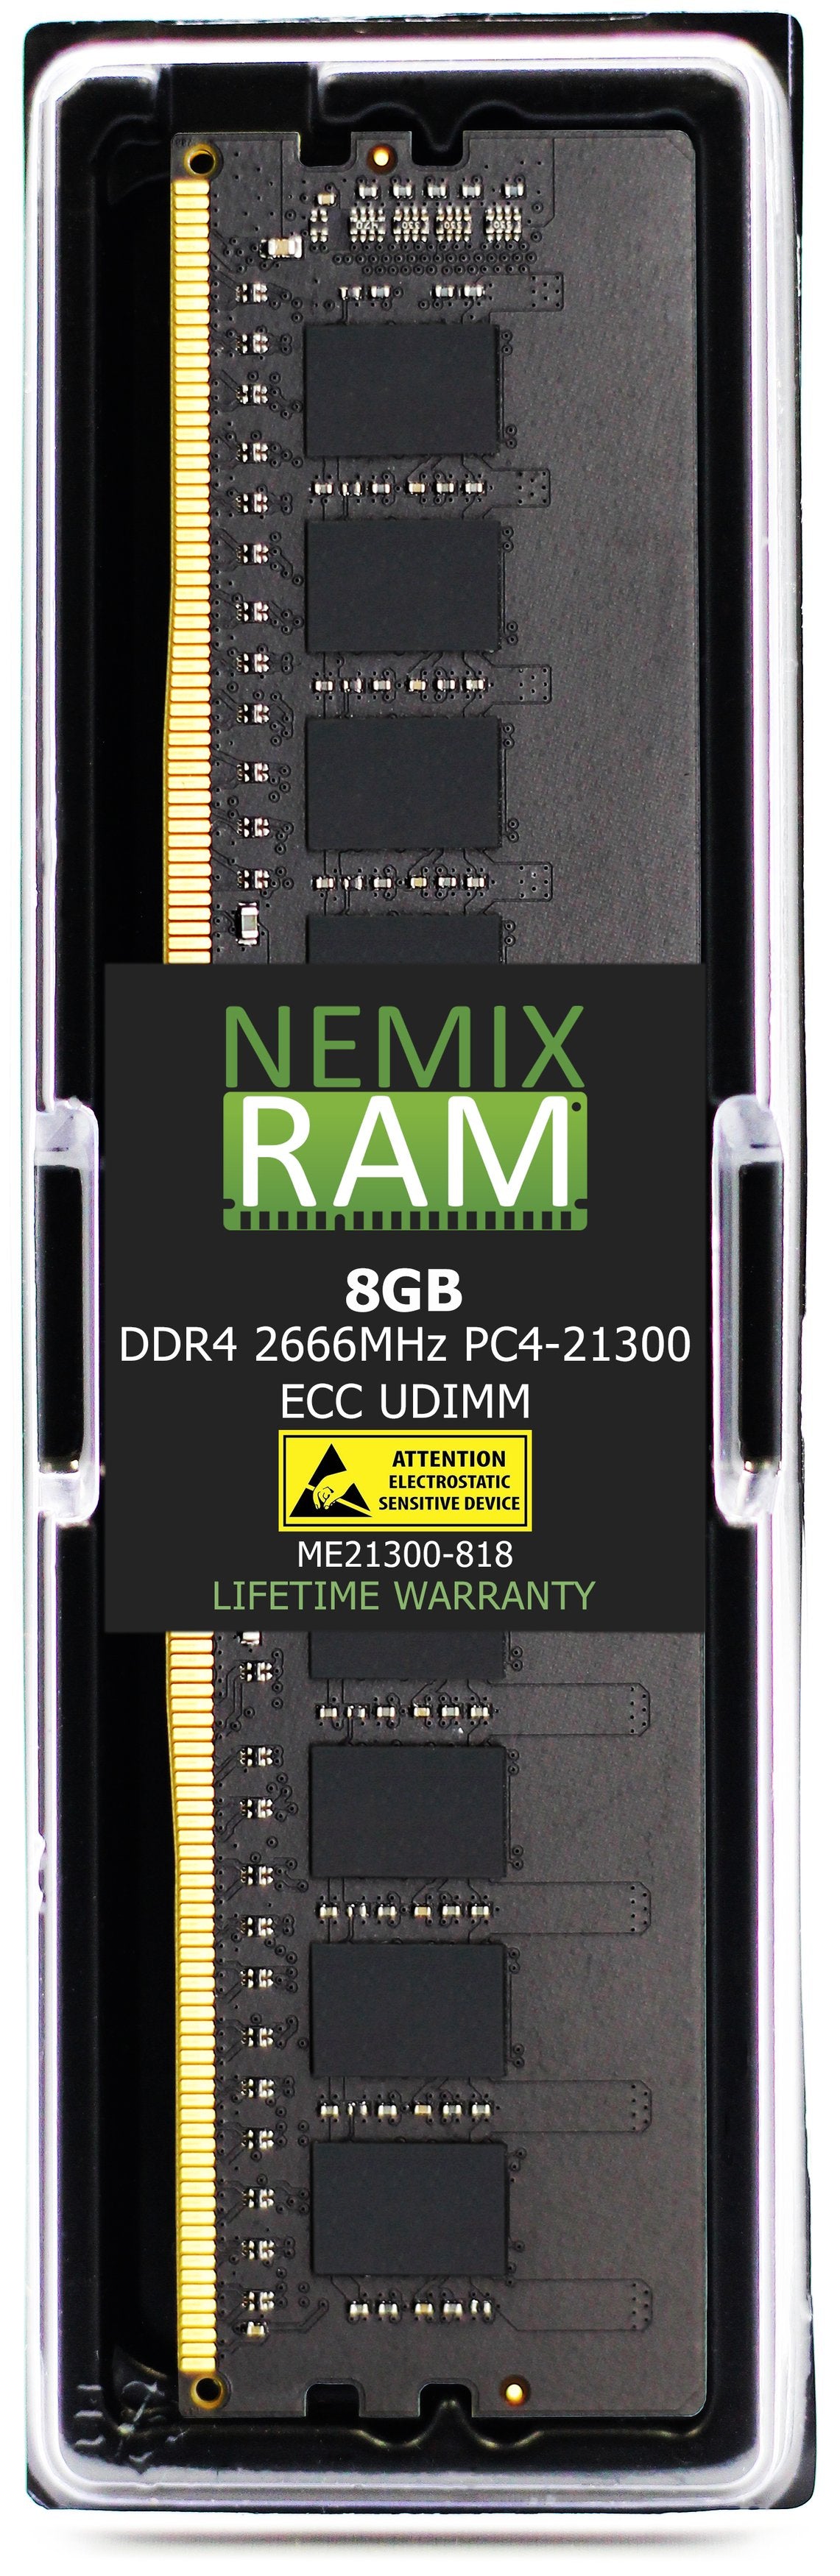 DDR4 2666MHZ PC4-21300 ECC UDIMM Compatible with Synology RackStation RS2423RP+